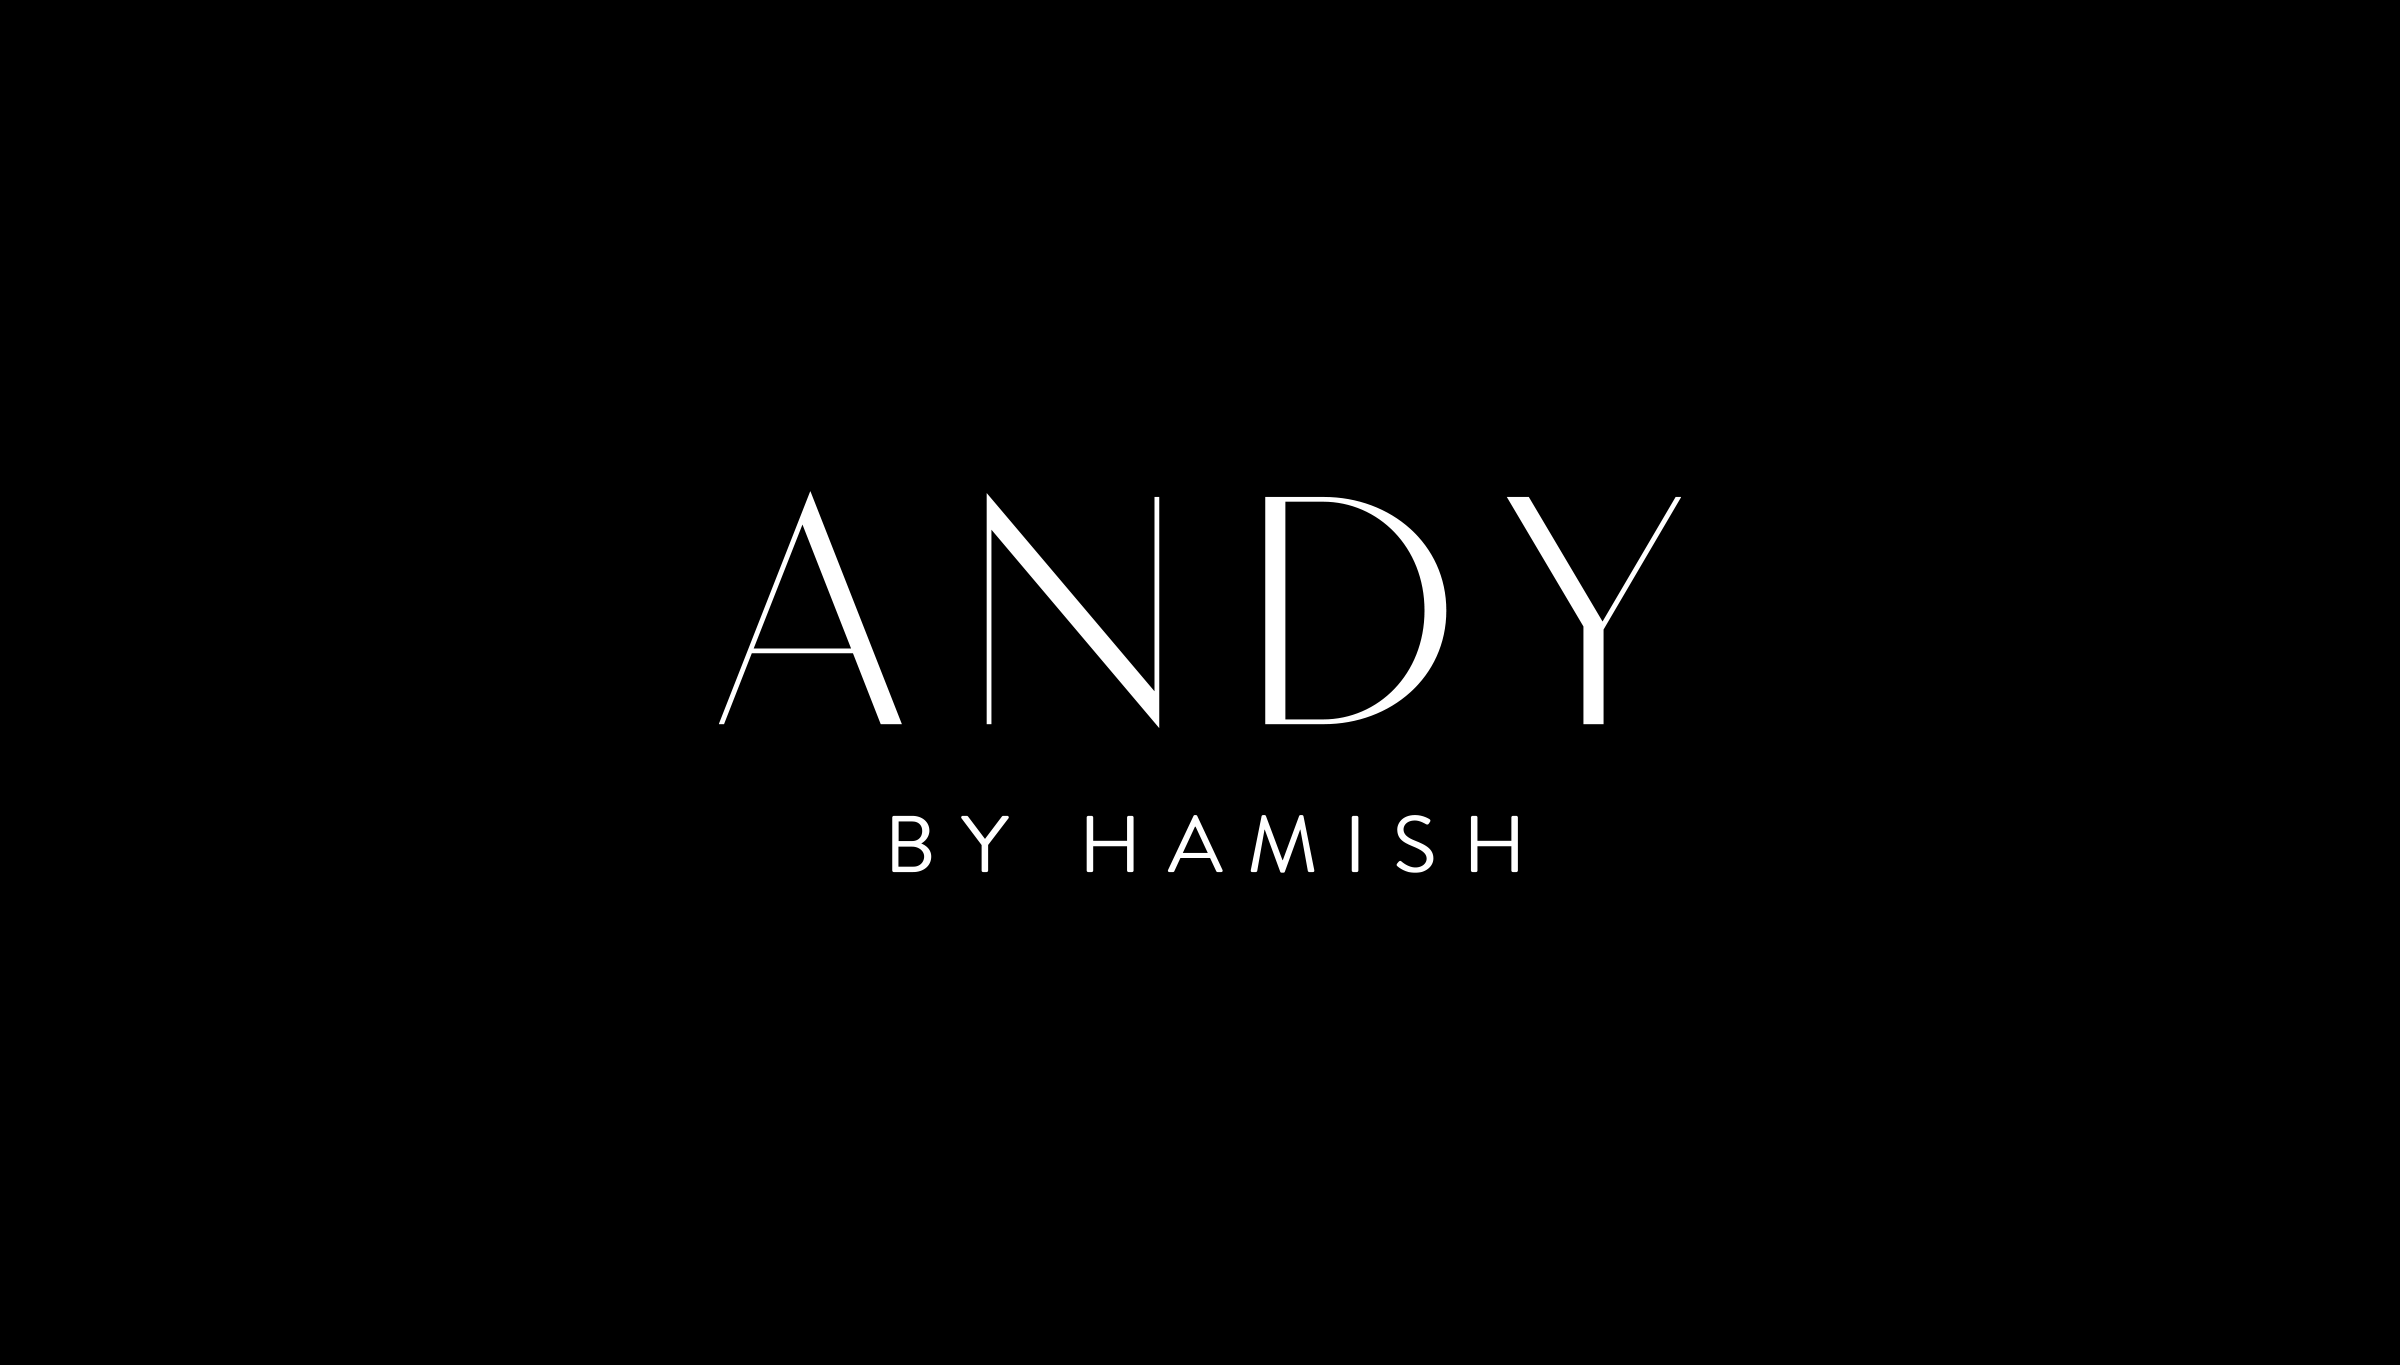 Andy by Hamish Date Of Birth Design Branding